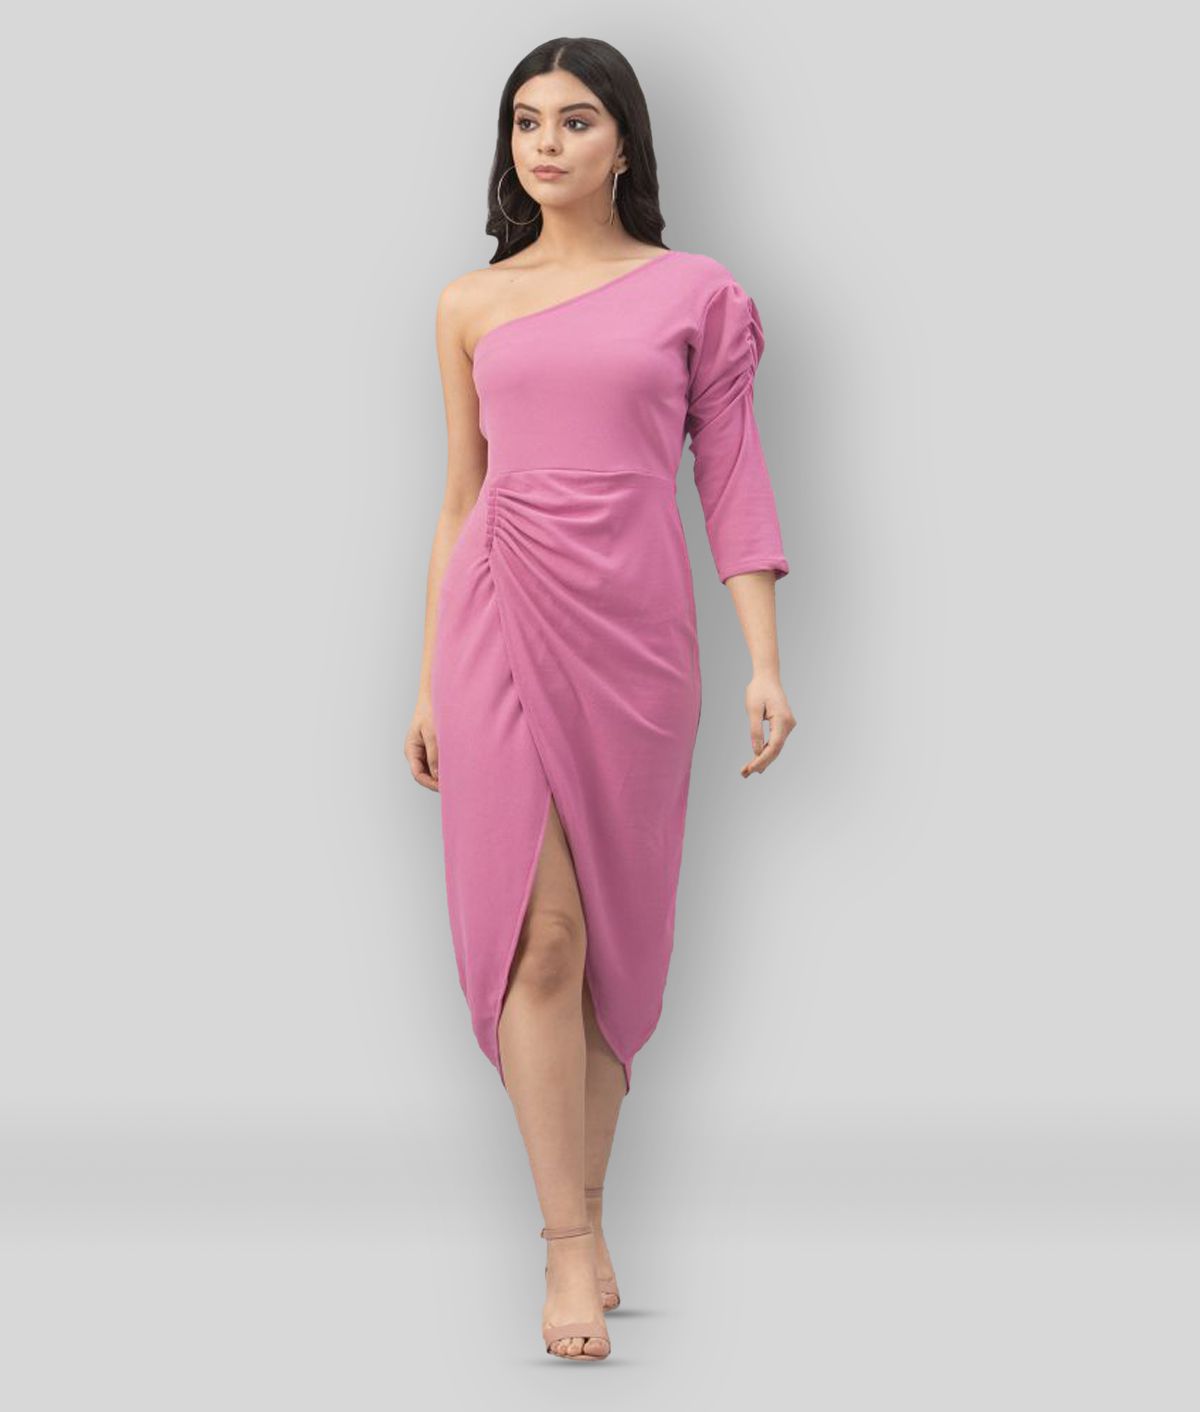     			Selvia - Pink Cotton Blend Women's Bodycon Dress ( Pack of 1 )